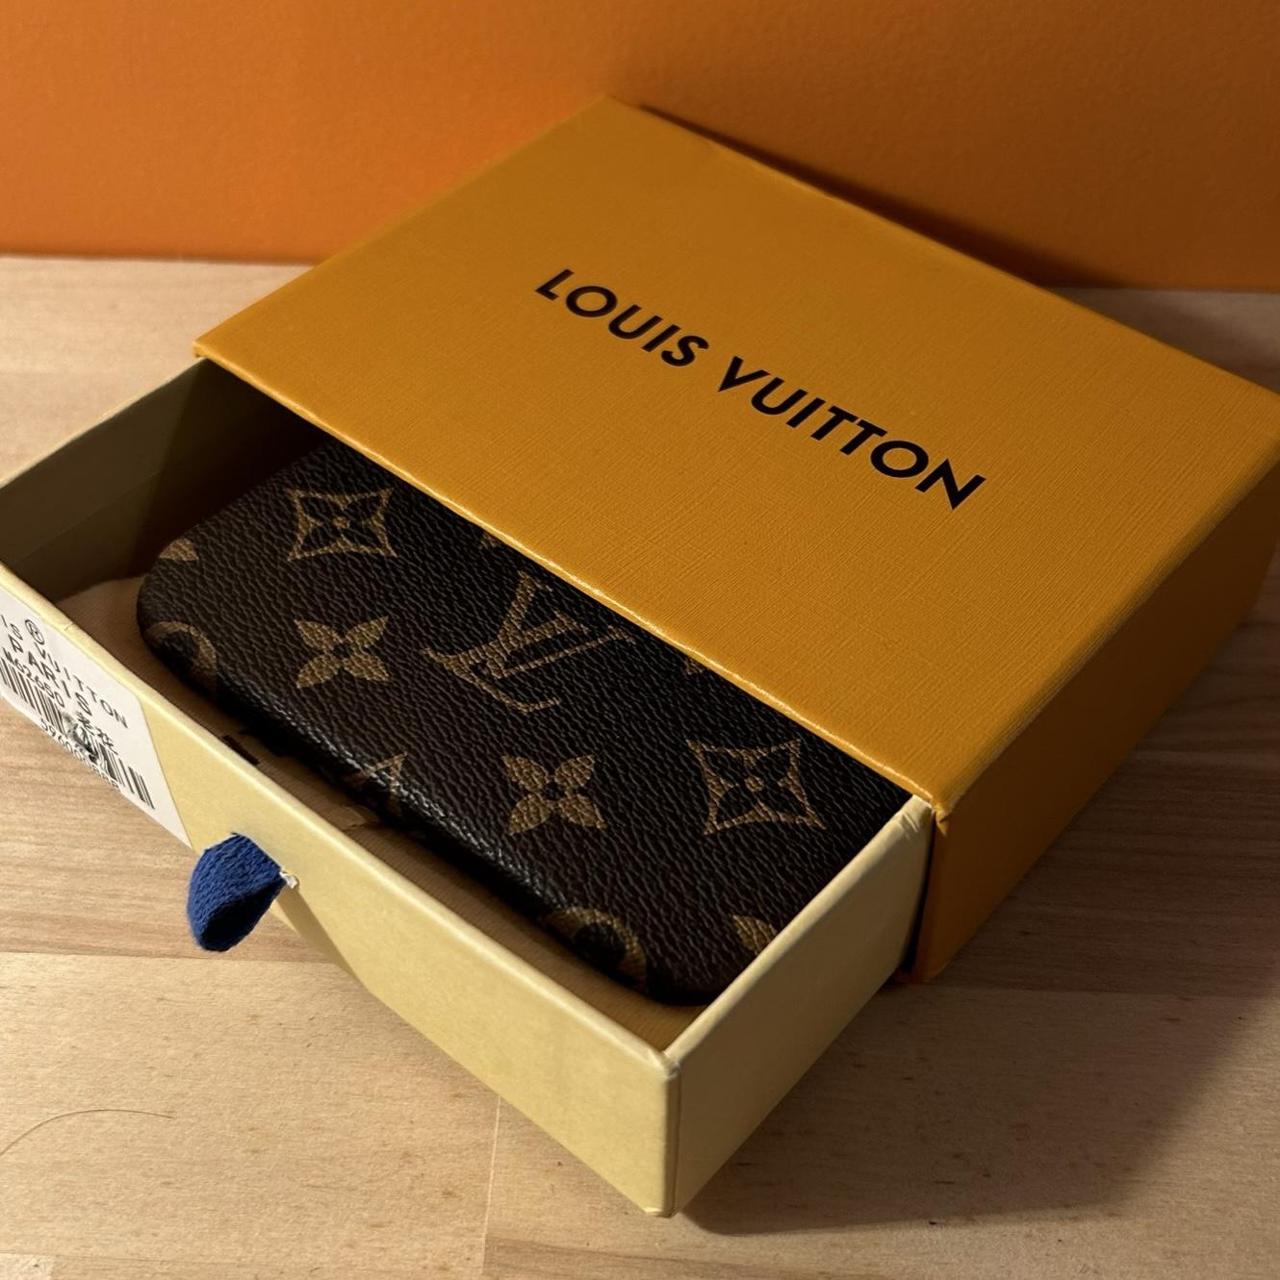 LOUIS VUITTON WALLET. comes with box. Coin pouch - - Depop